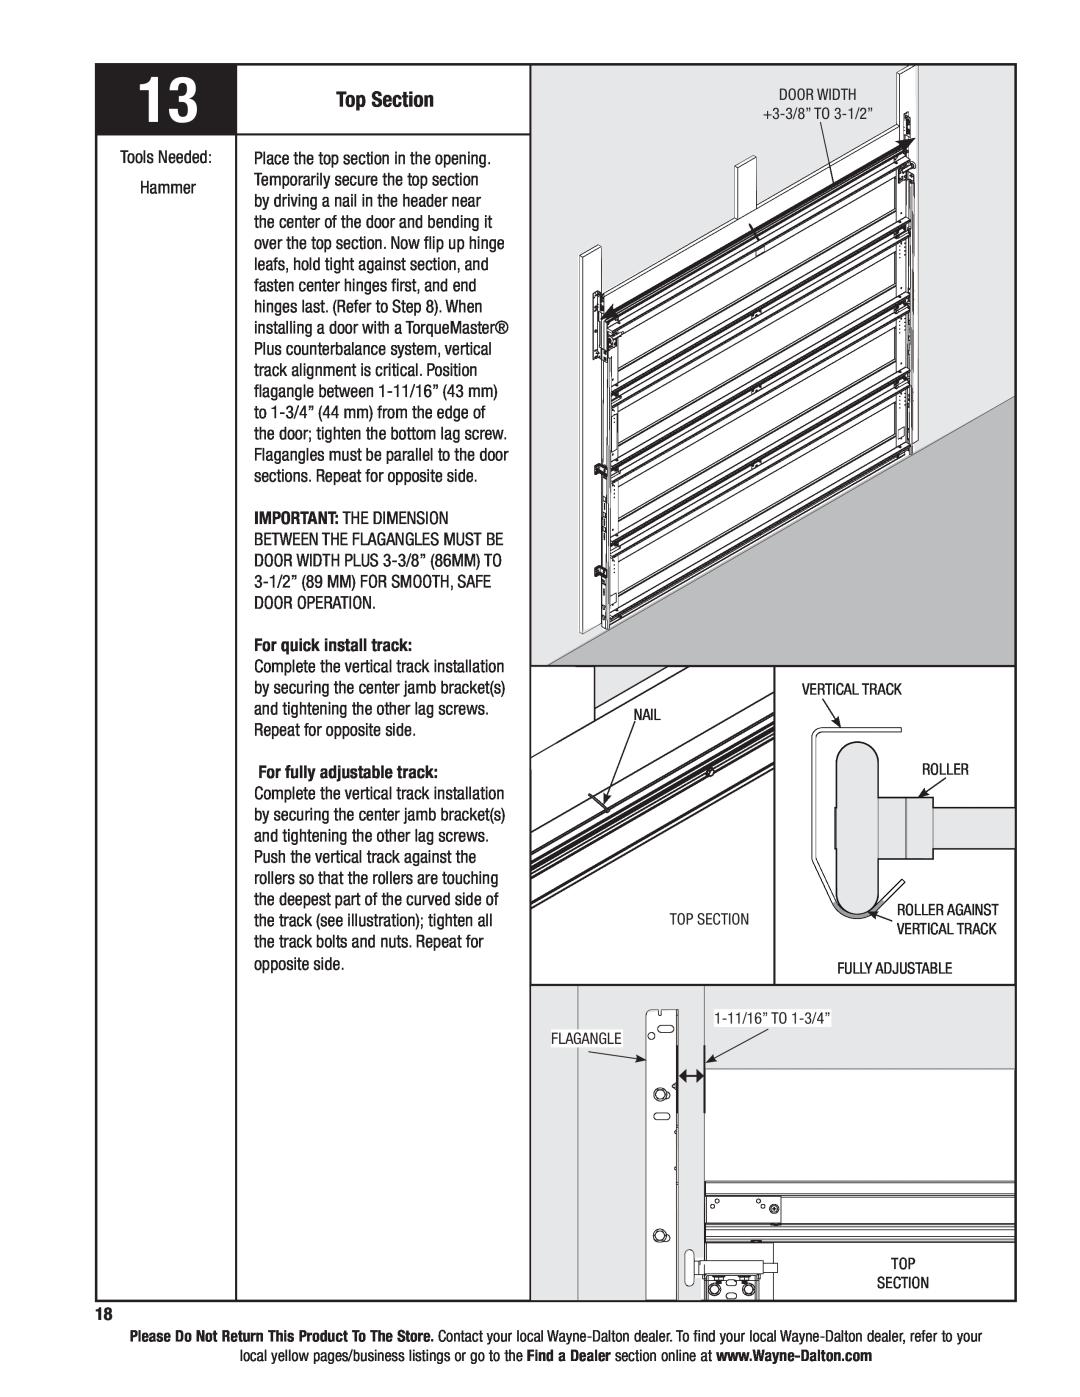 Wayne-Dalton 9400, AND 9600 installation instructions Top Section 